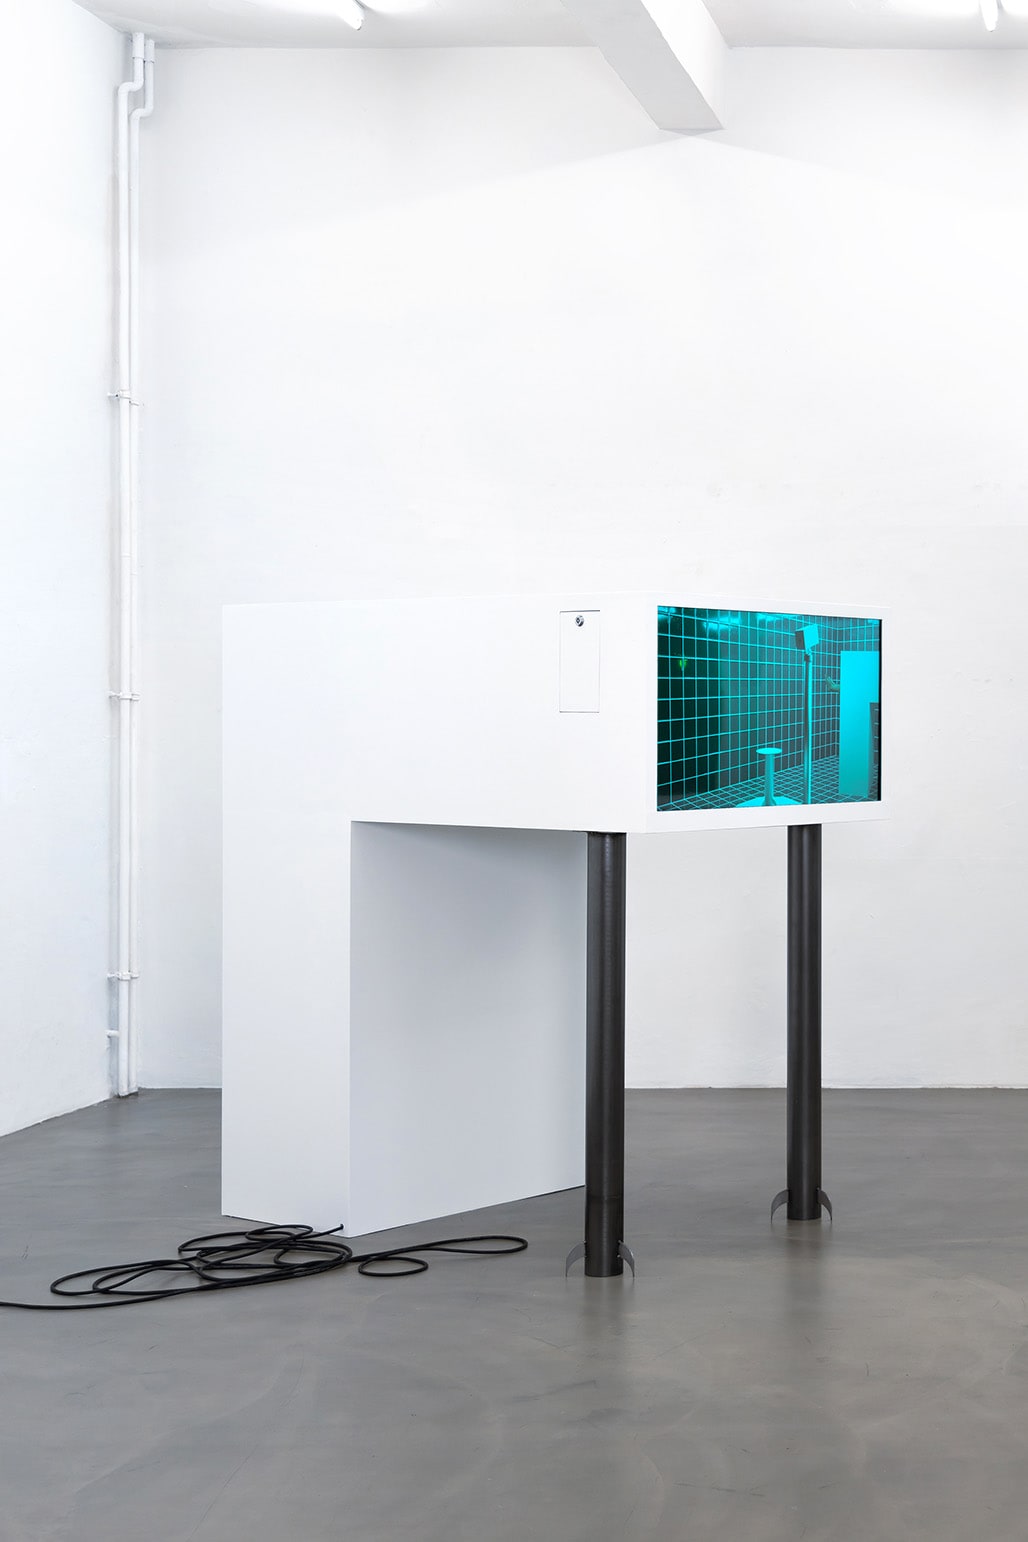 installation shot of n∰menon, showing a sculpture that integrates video